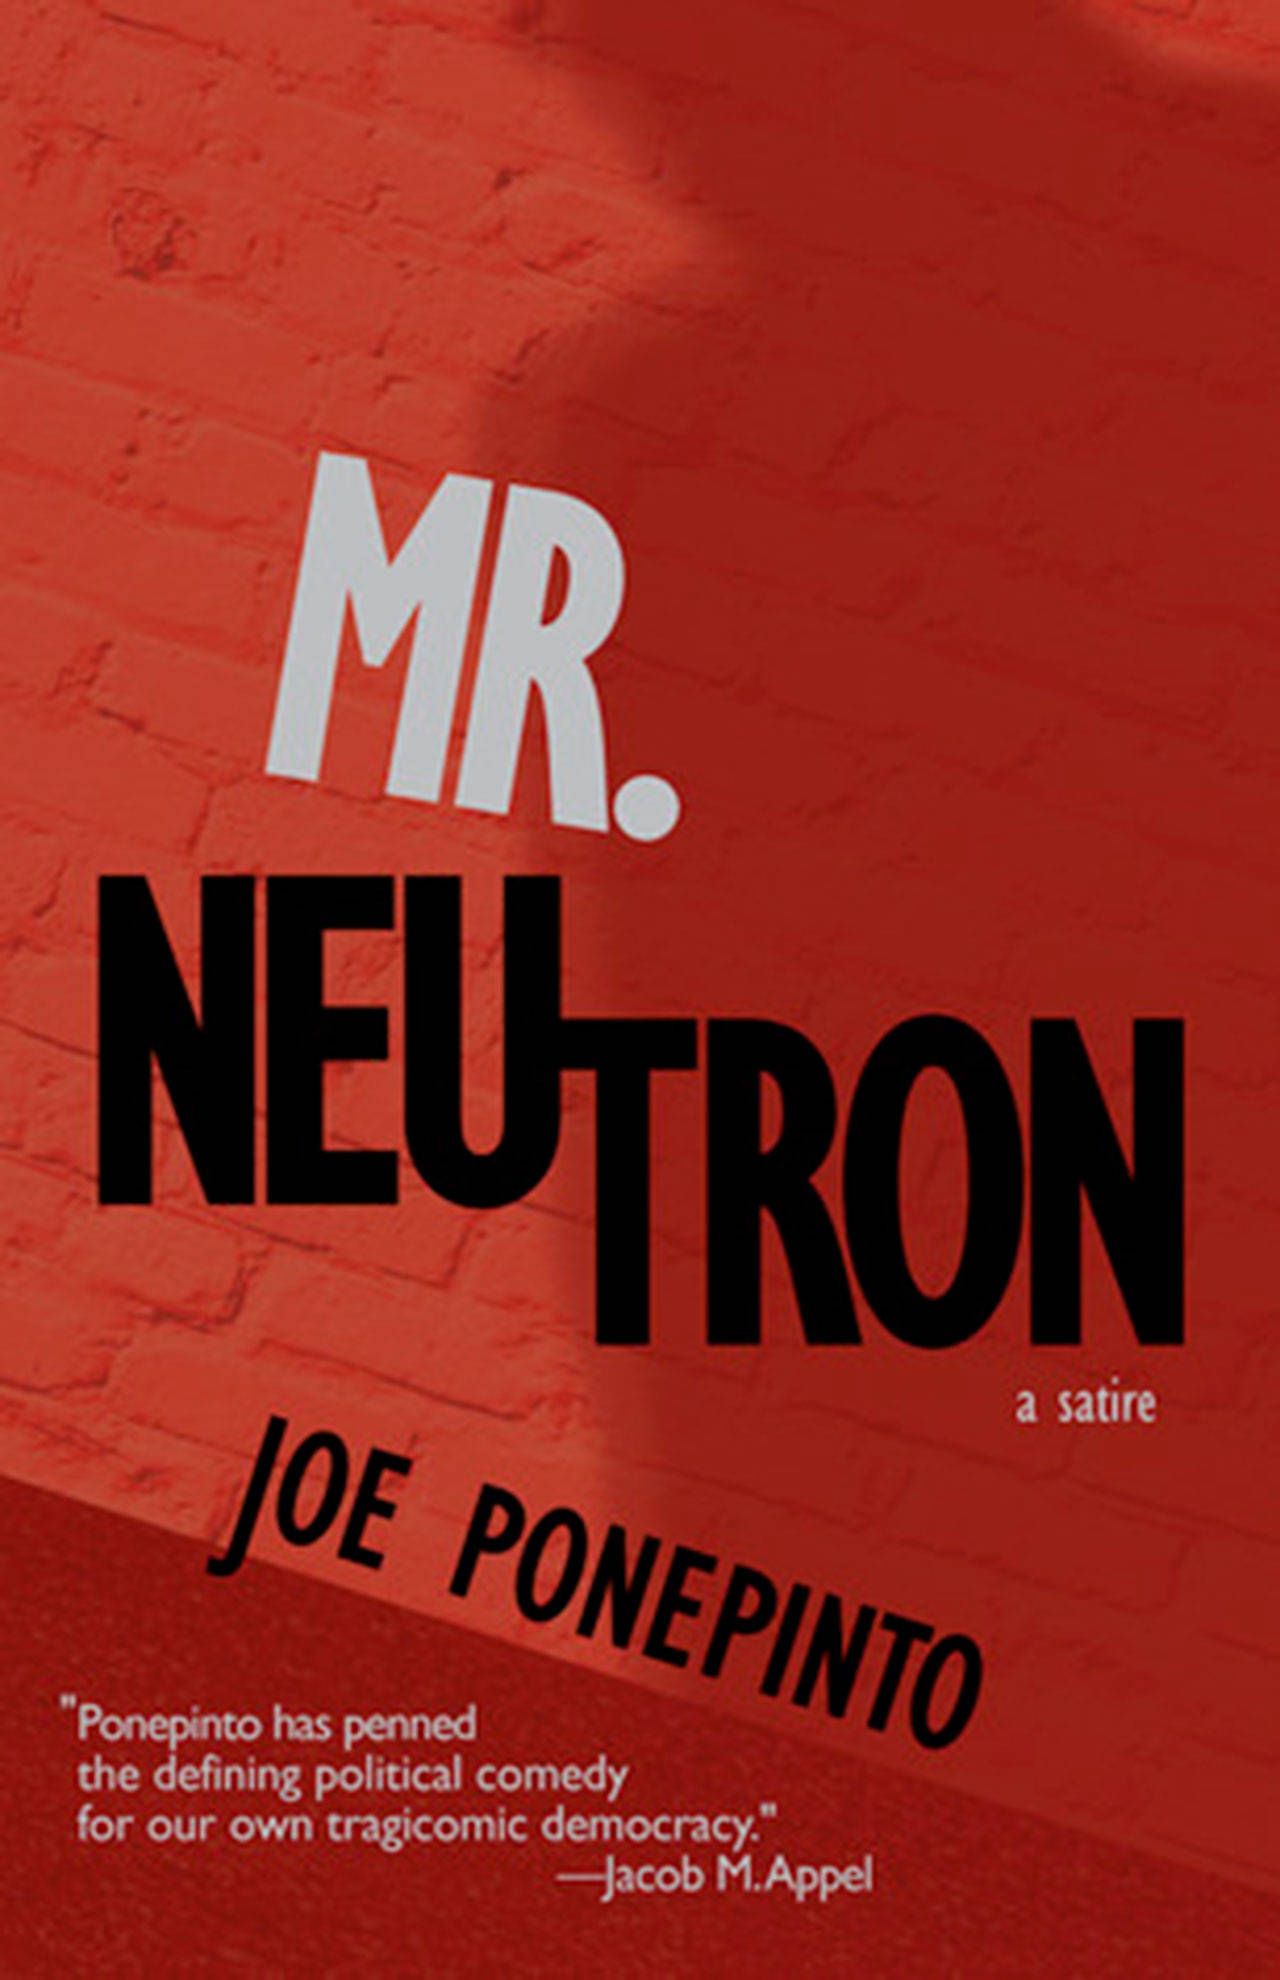 Image courtesy of Eagle Harbor Book Company | Kathleen Alcalá will host a conversation with author Joe Ponepinto about his new satirical novel “Mr. Neutron” at 7 p.m. Thursday, March 15 at Eagle Harbor Book Company.